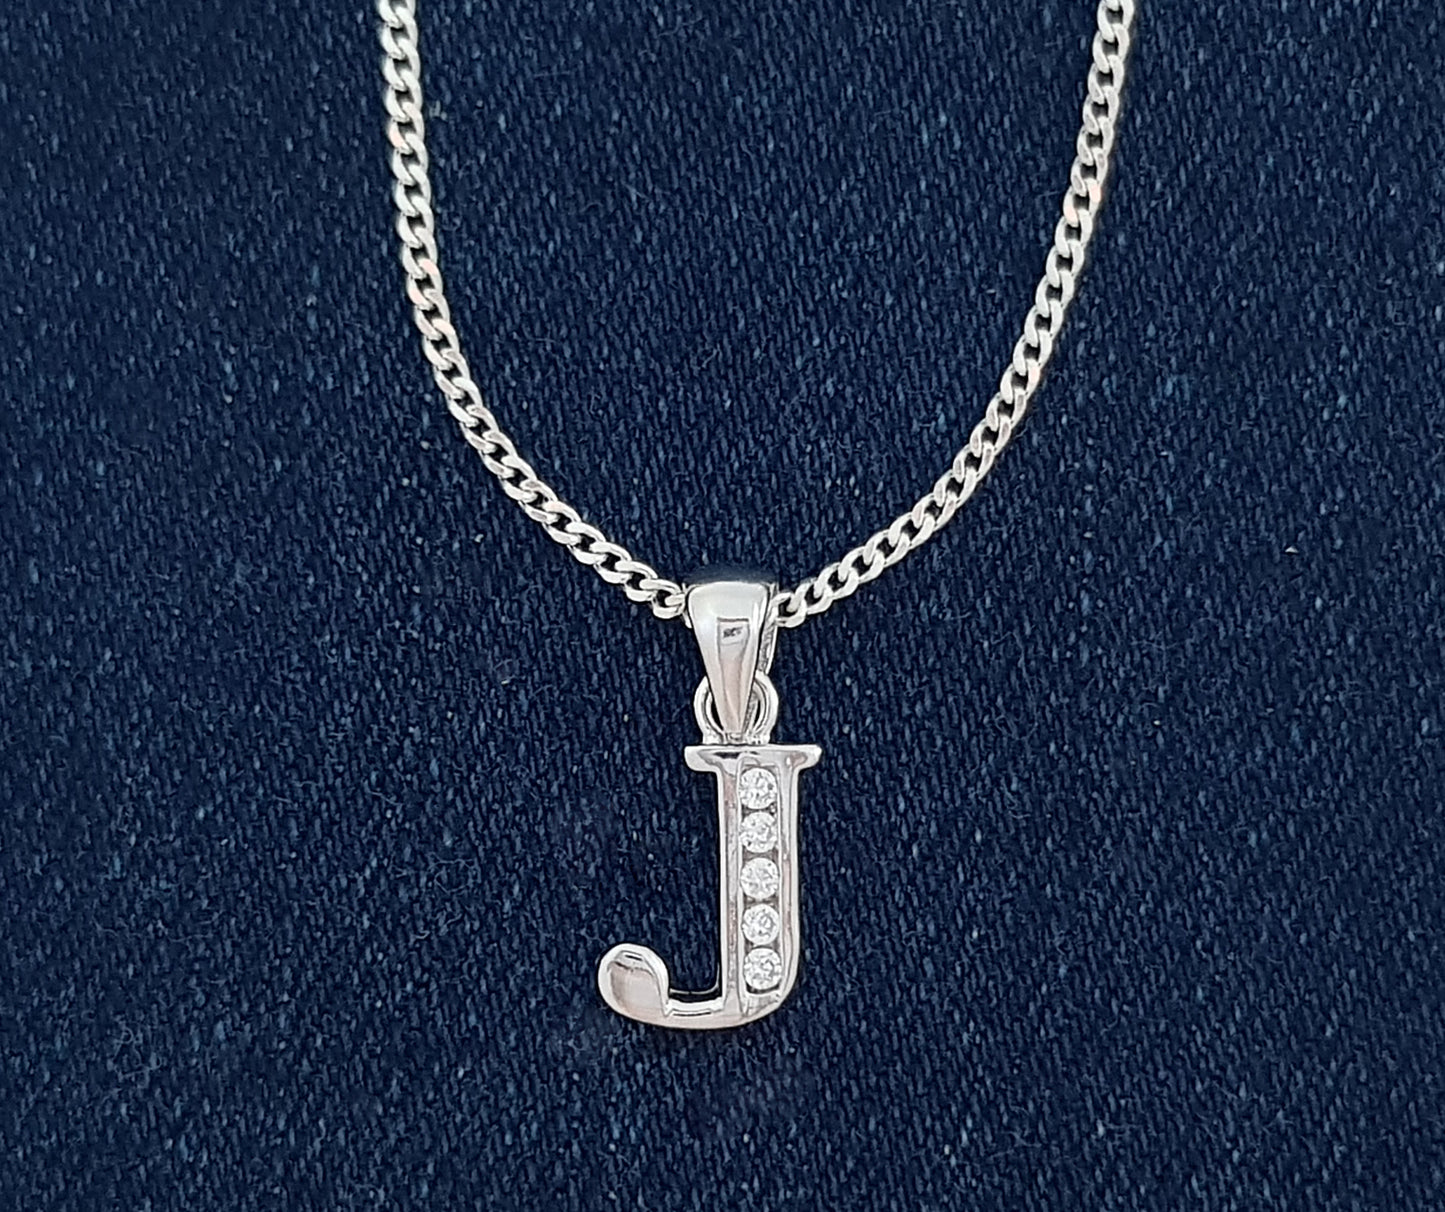 Sterling Silver Initial with Cubic Zirconia Stones- "J" Initial or Letter